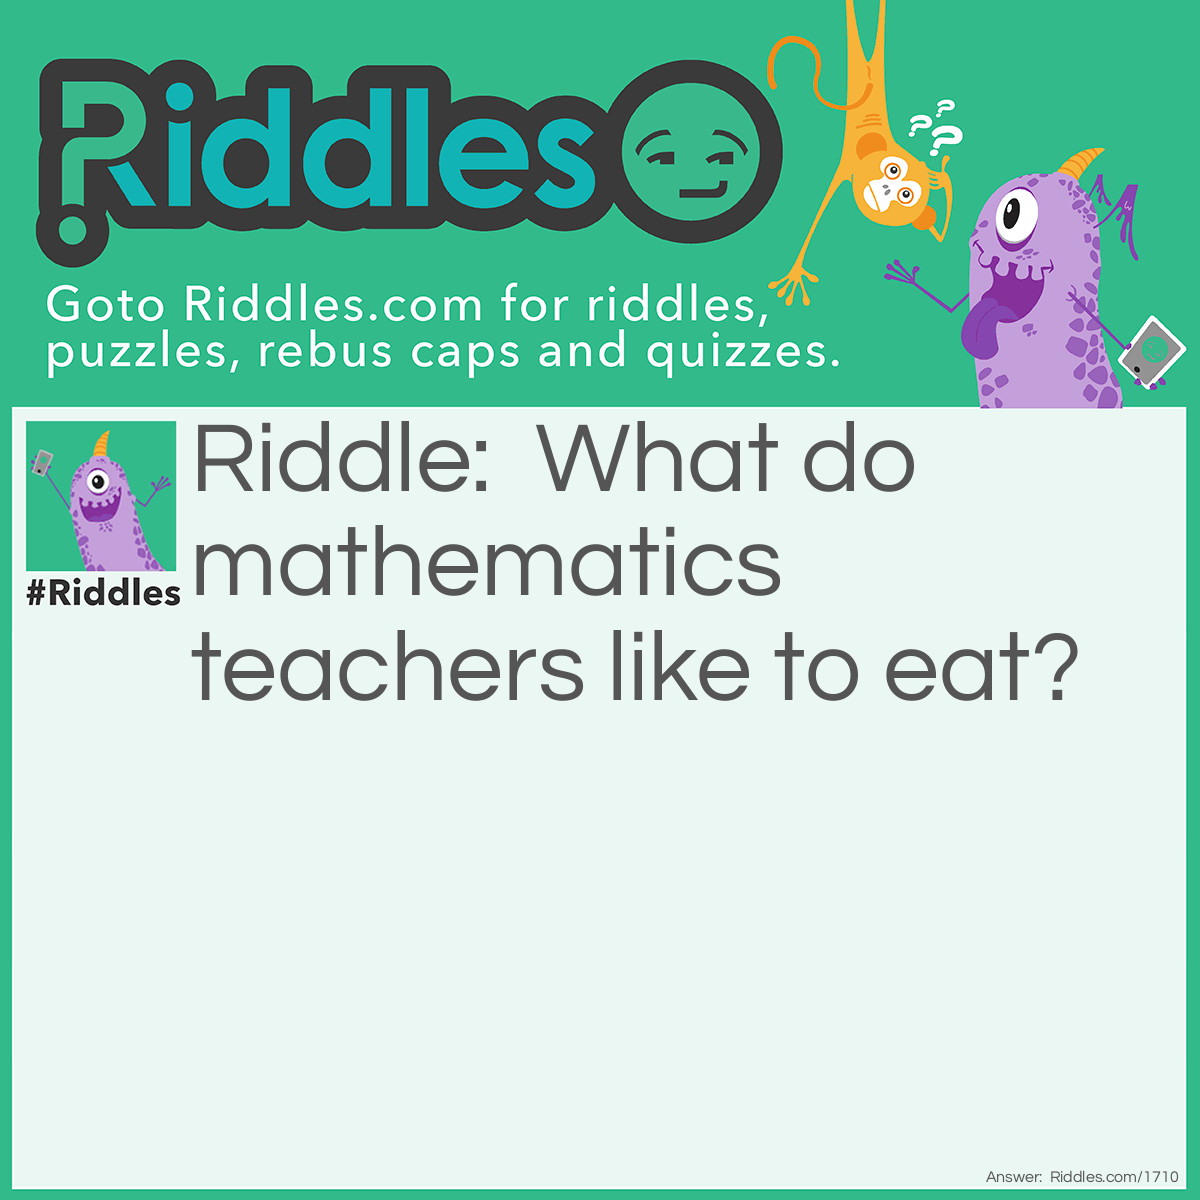 Riddle: What do mathematics teachers like to eat? Answer: Pi.